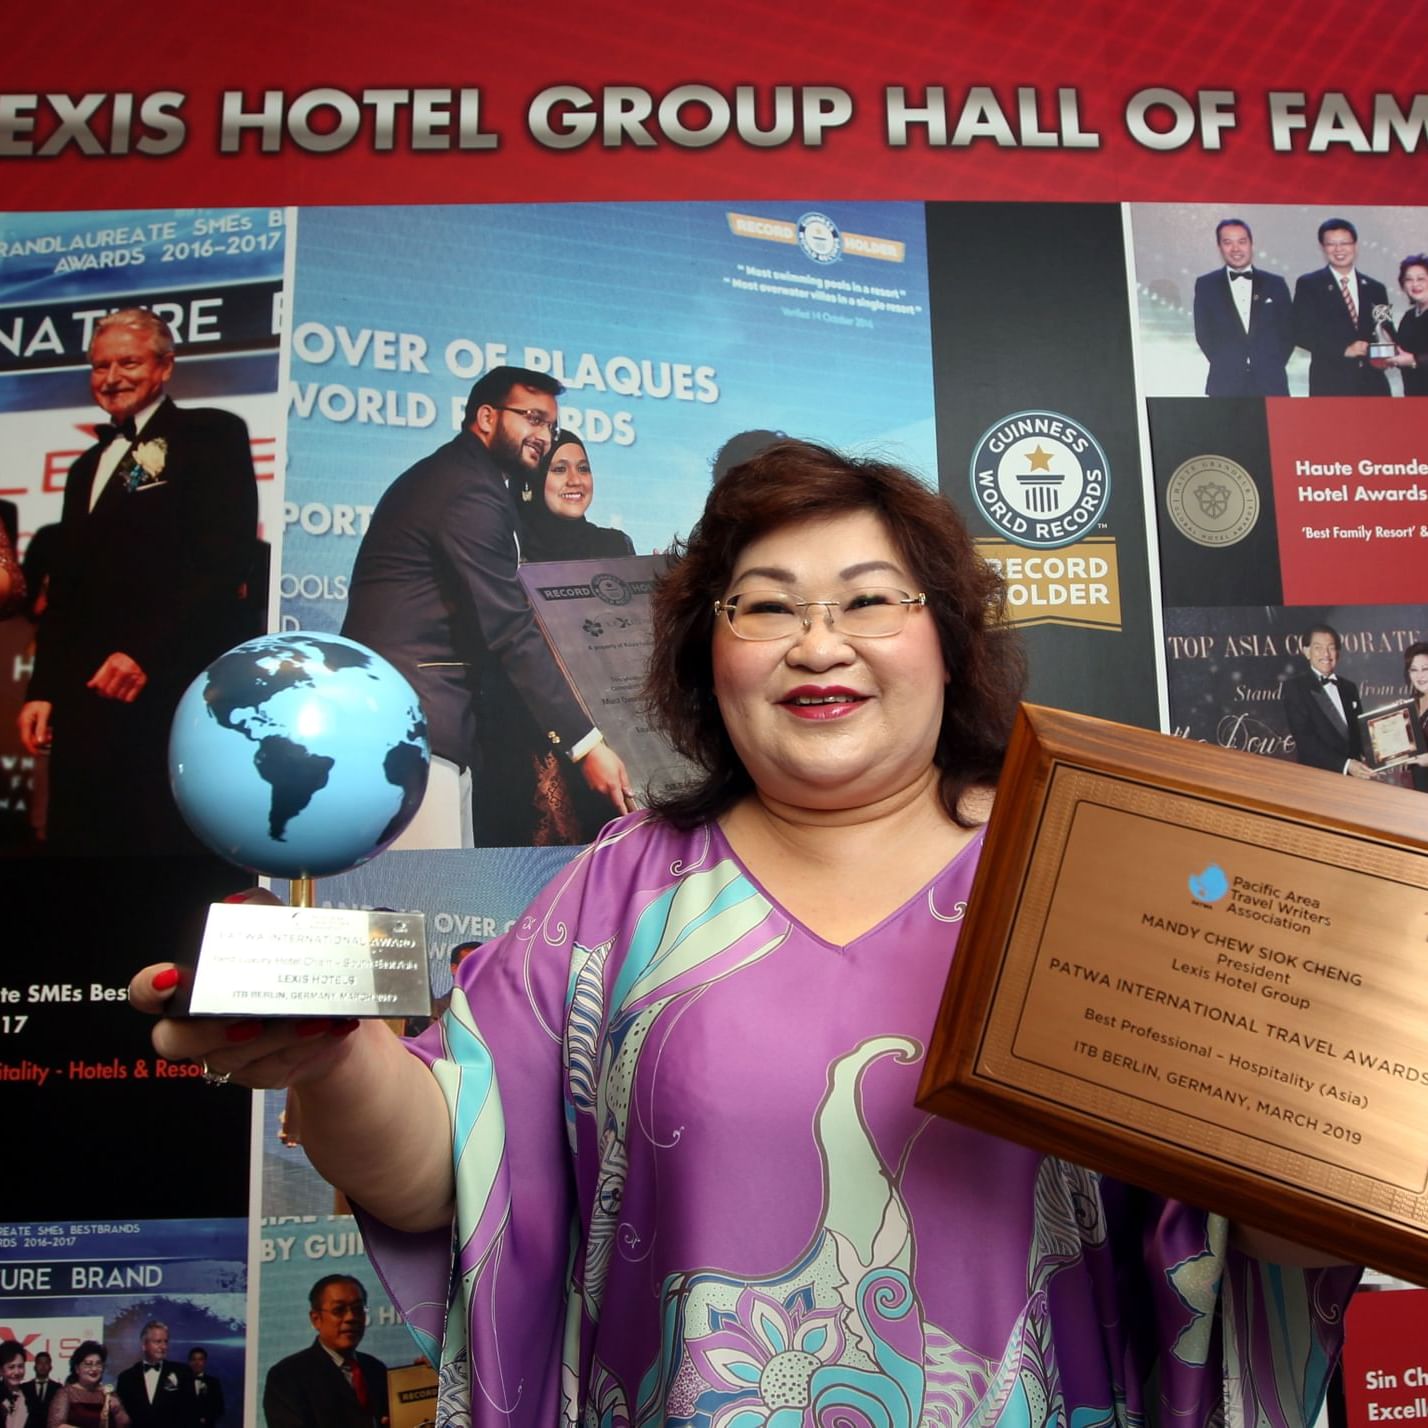 Lexis Hotel Group Awarded Best Luxury Hotel Chain